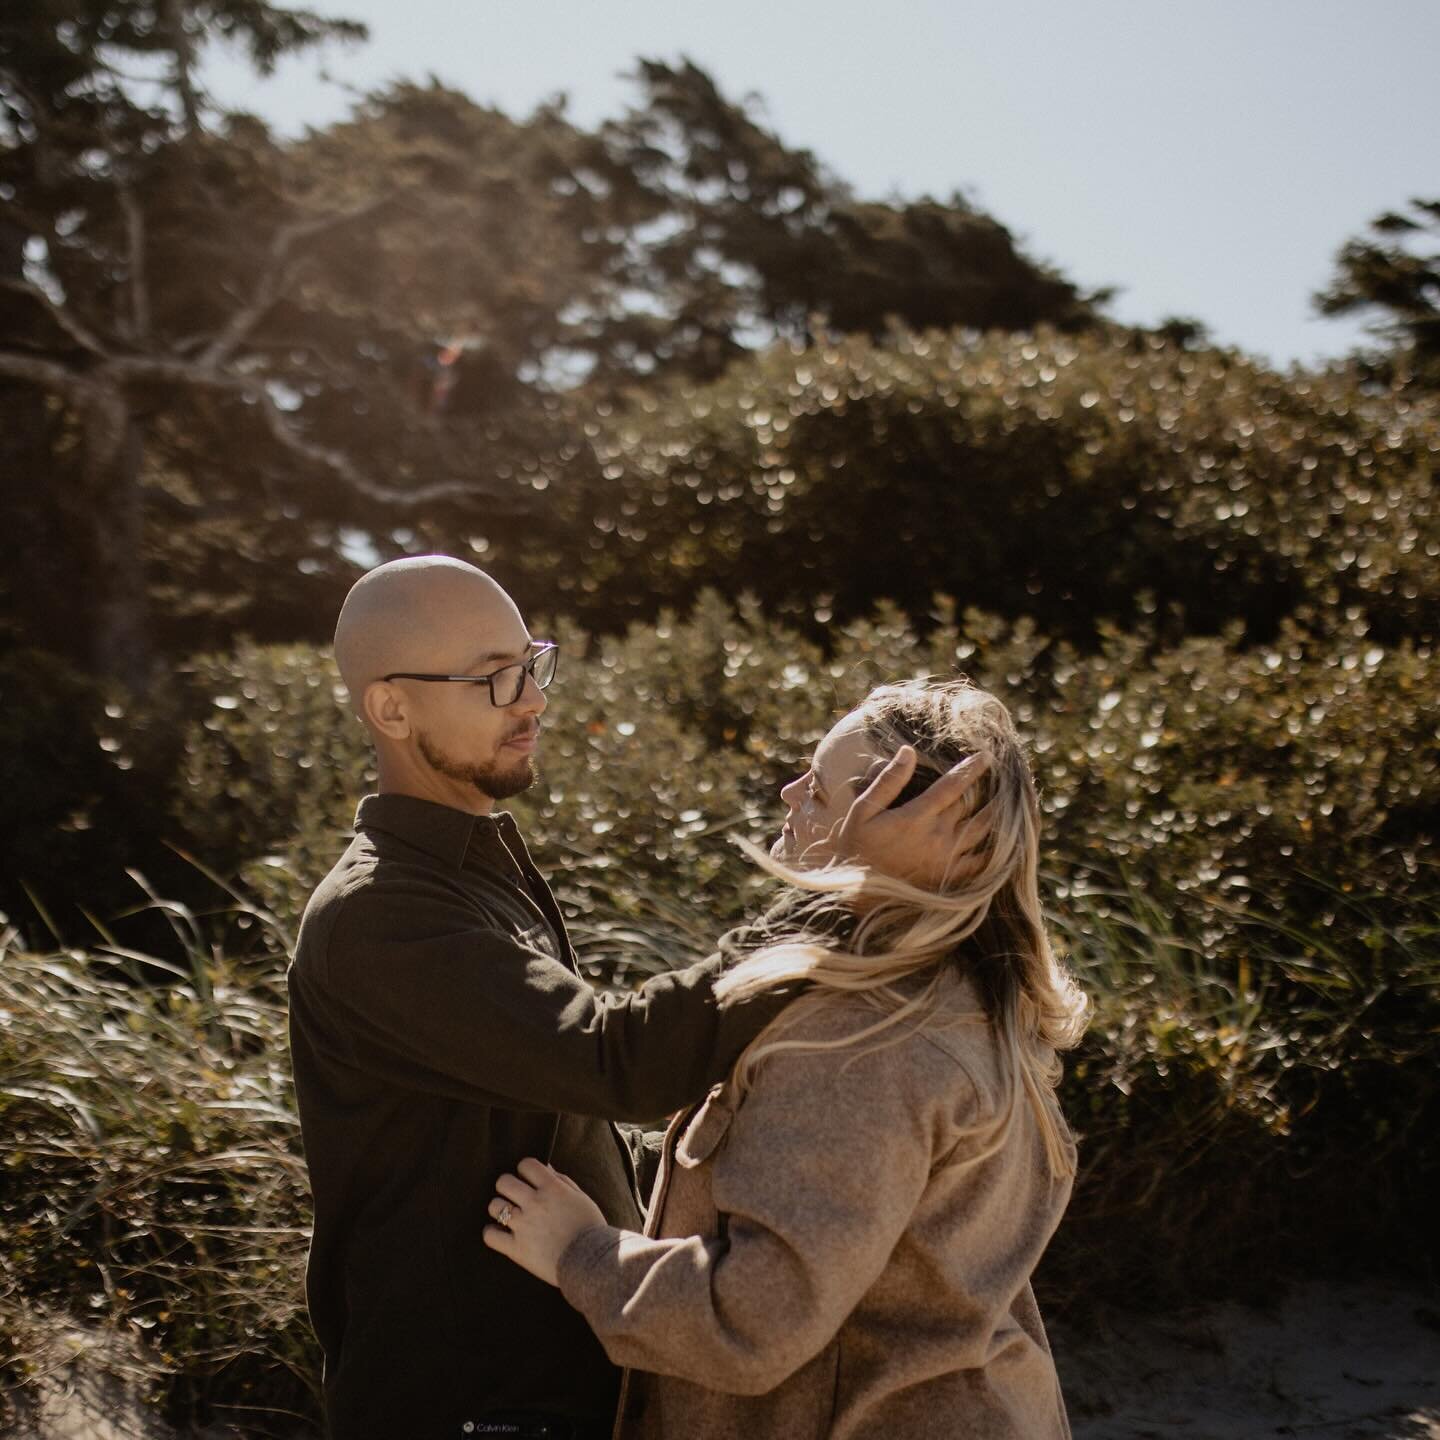 Erika + Devon&rsquo;s anniversary session on the coast was a sweet one ☀️

We had taken our time grabbing coffee and breakfast at the coffeeshop beforehand which meant the sun had more time to rise high in the sky &mdash; not the ideal lighting condi